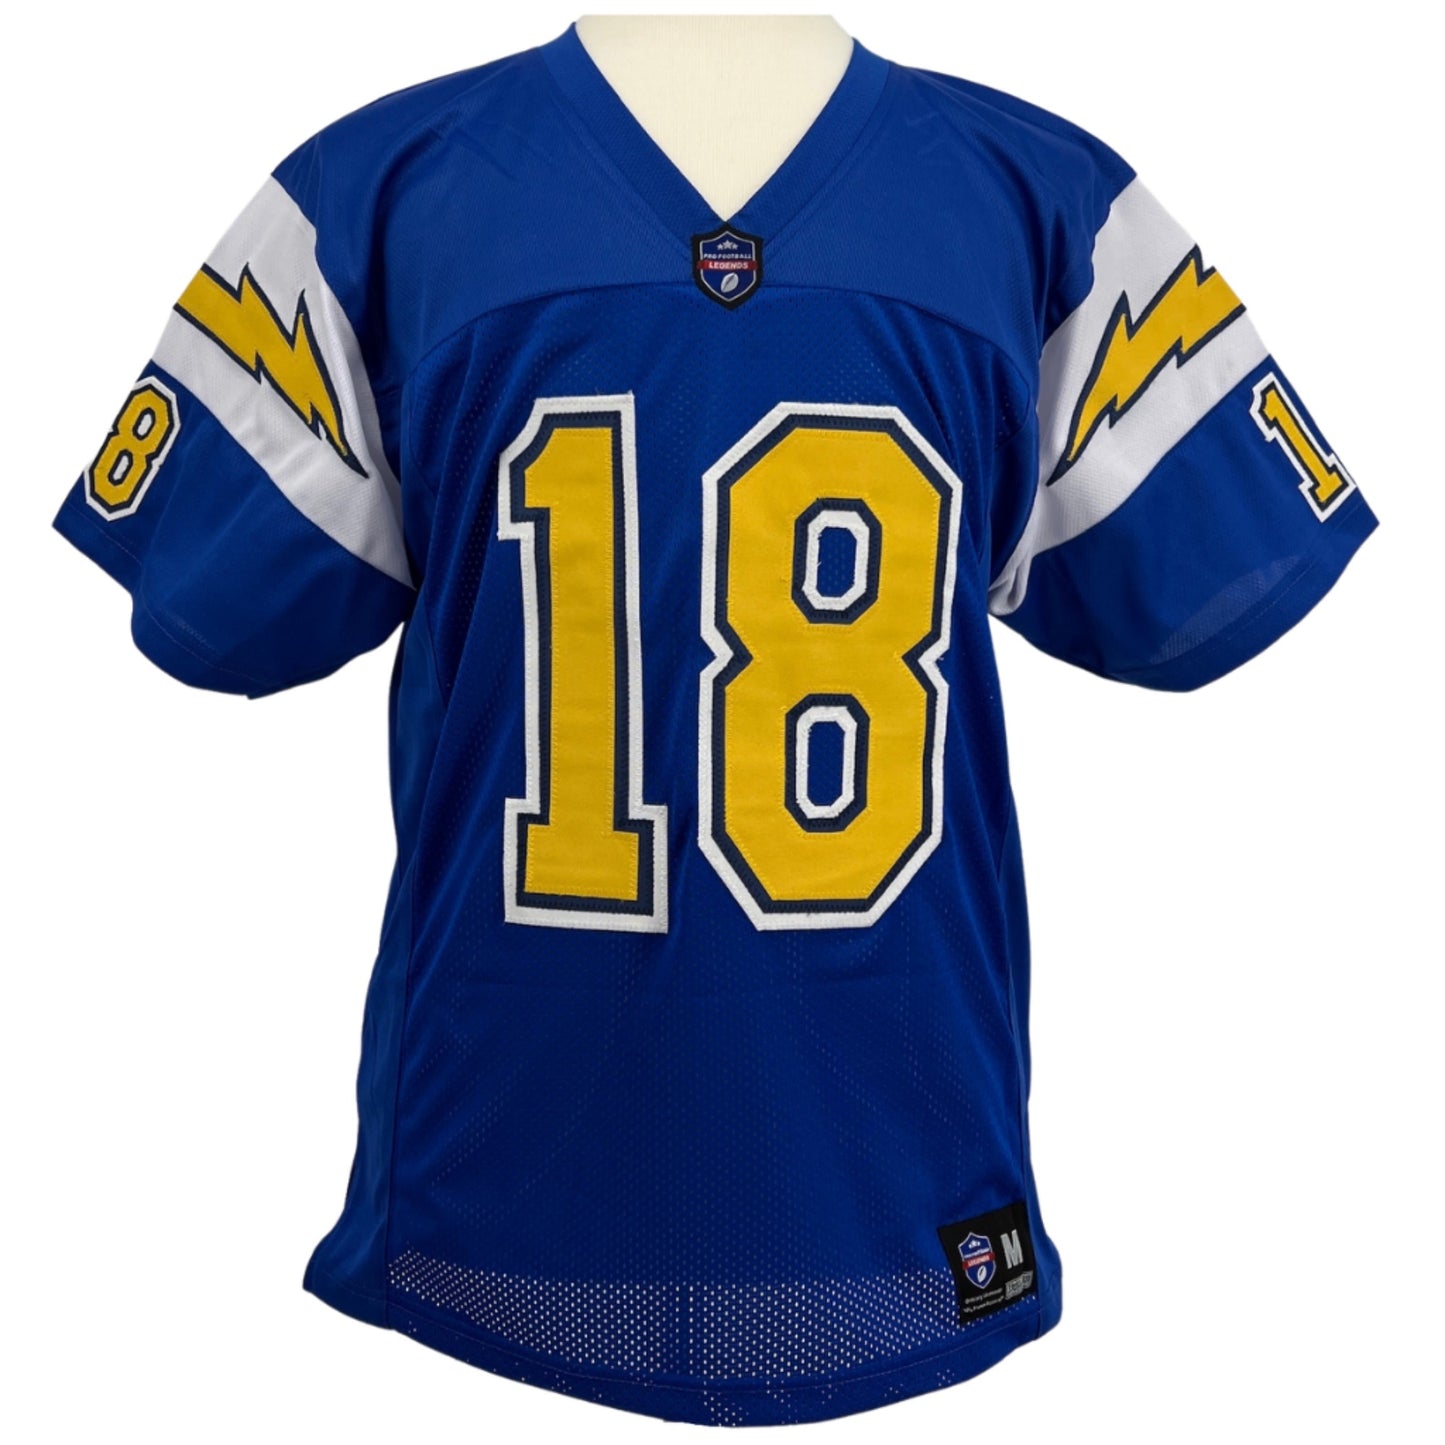 Charlie Joiner Jersey Royal Blue San Diego | M-5XL Custom Sewn Stitched